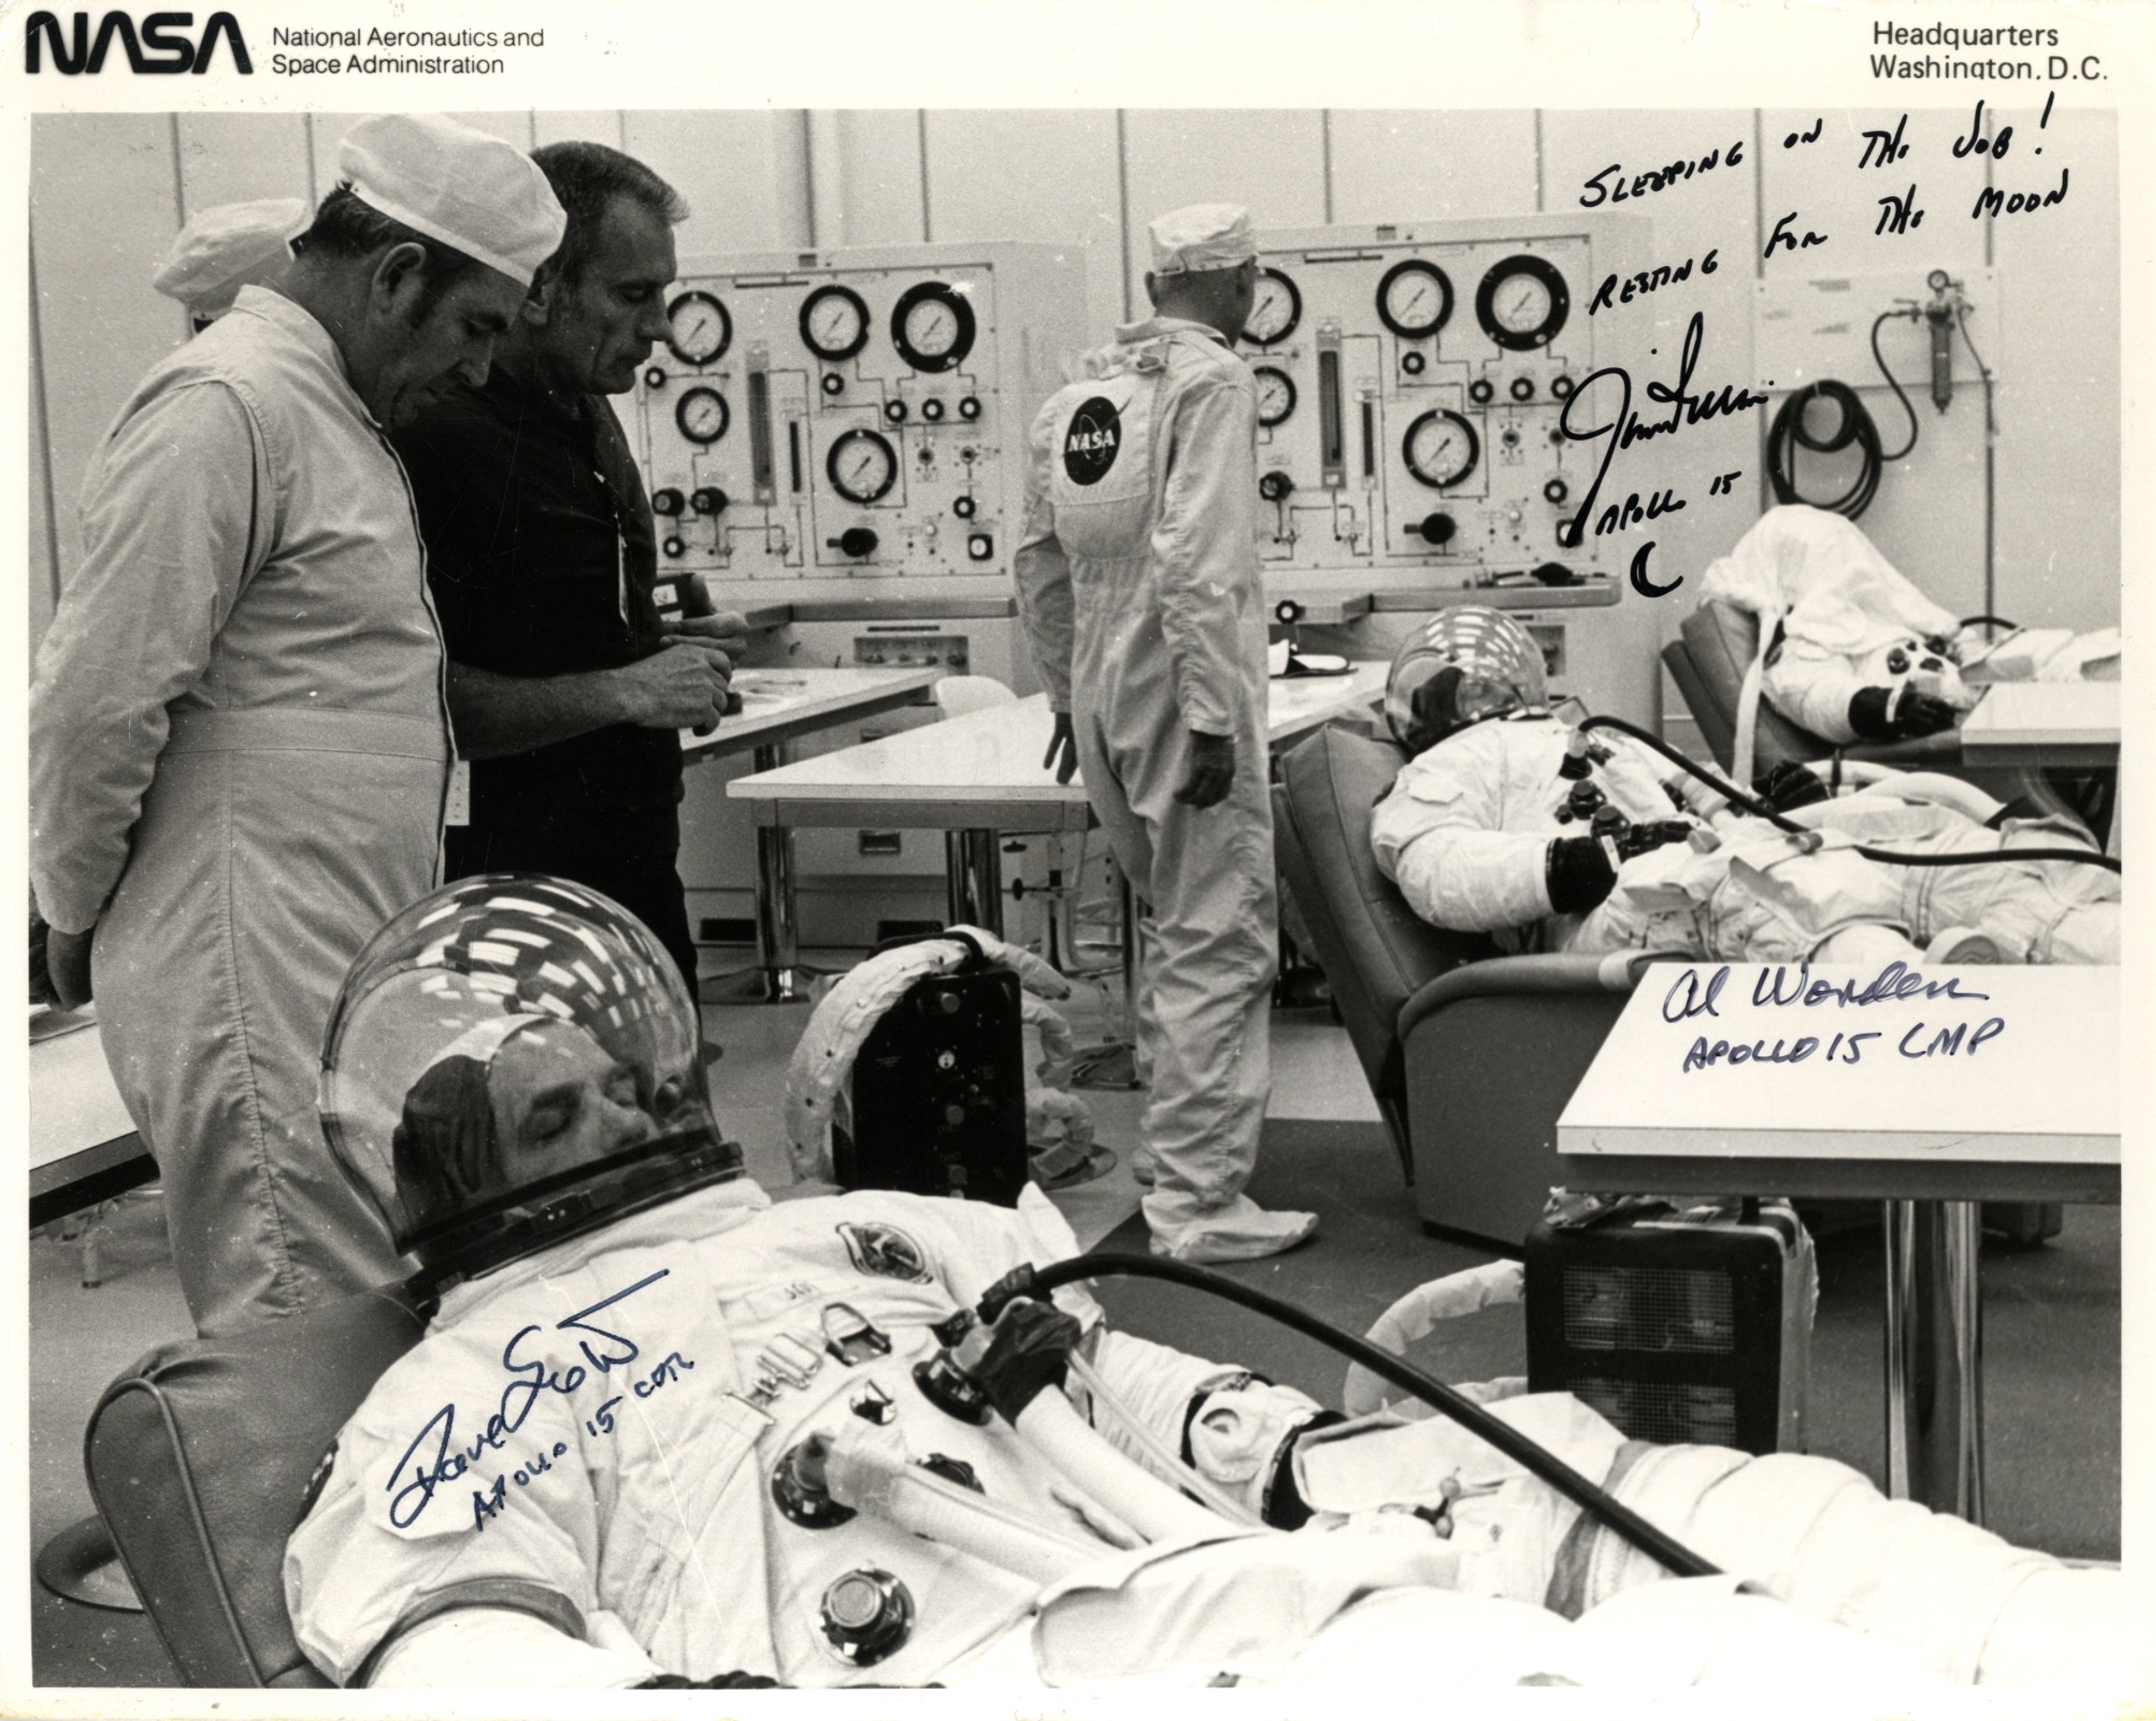 APOLLO XV: An excellent signed 10 x 8 photograph by all three crew members of Apollo XV